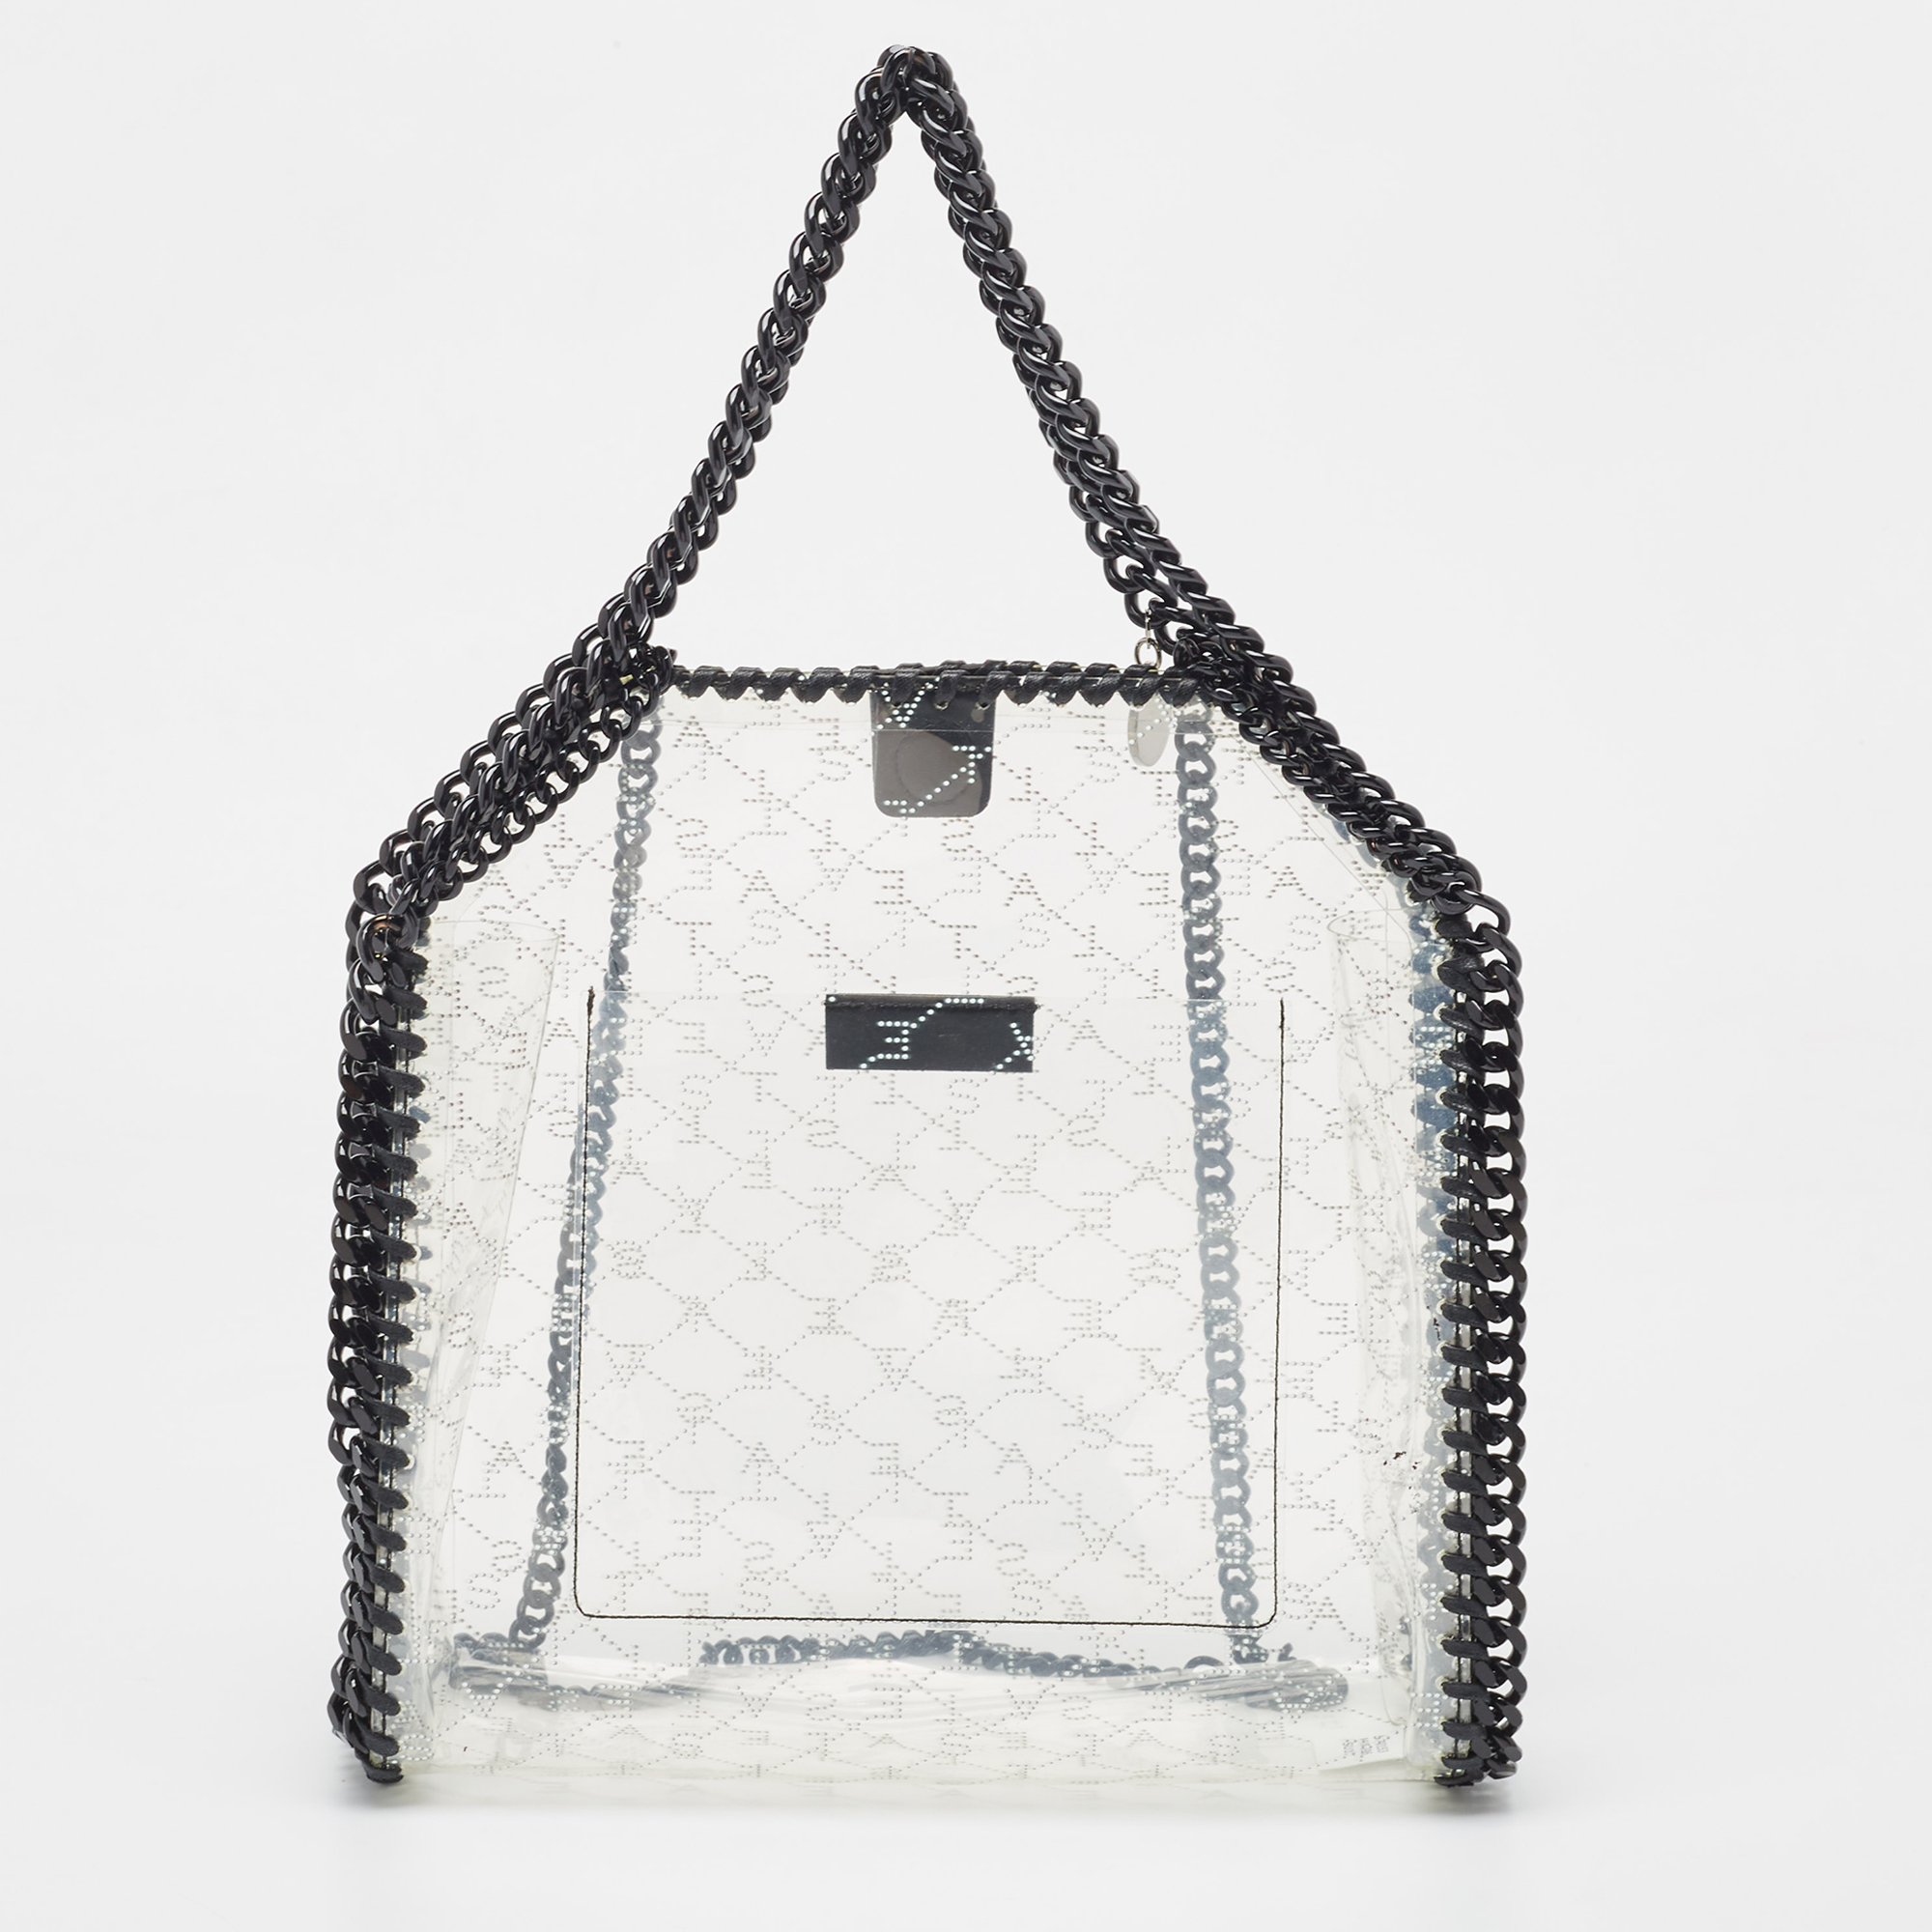 The chain whipstitch detailing beautifully outlines this Stella Mc Cartney Falabella tote. Crafted from PVC it has been adorned with black tone accents and it can be carried with dual chain handles. The lined interior can safely store your essentials neatly.